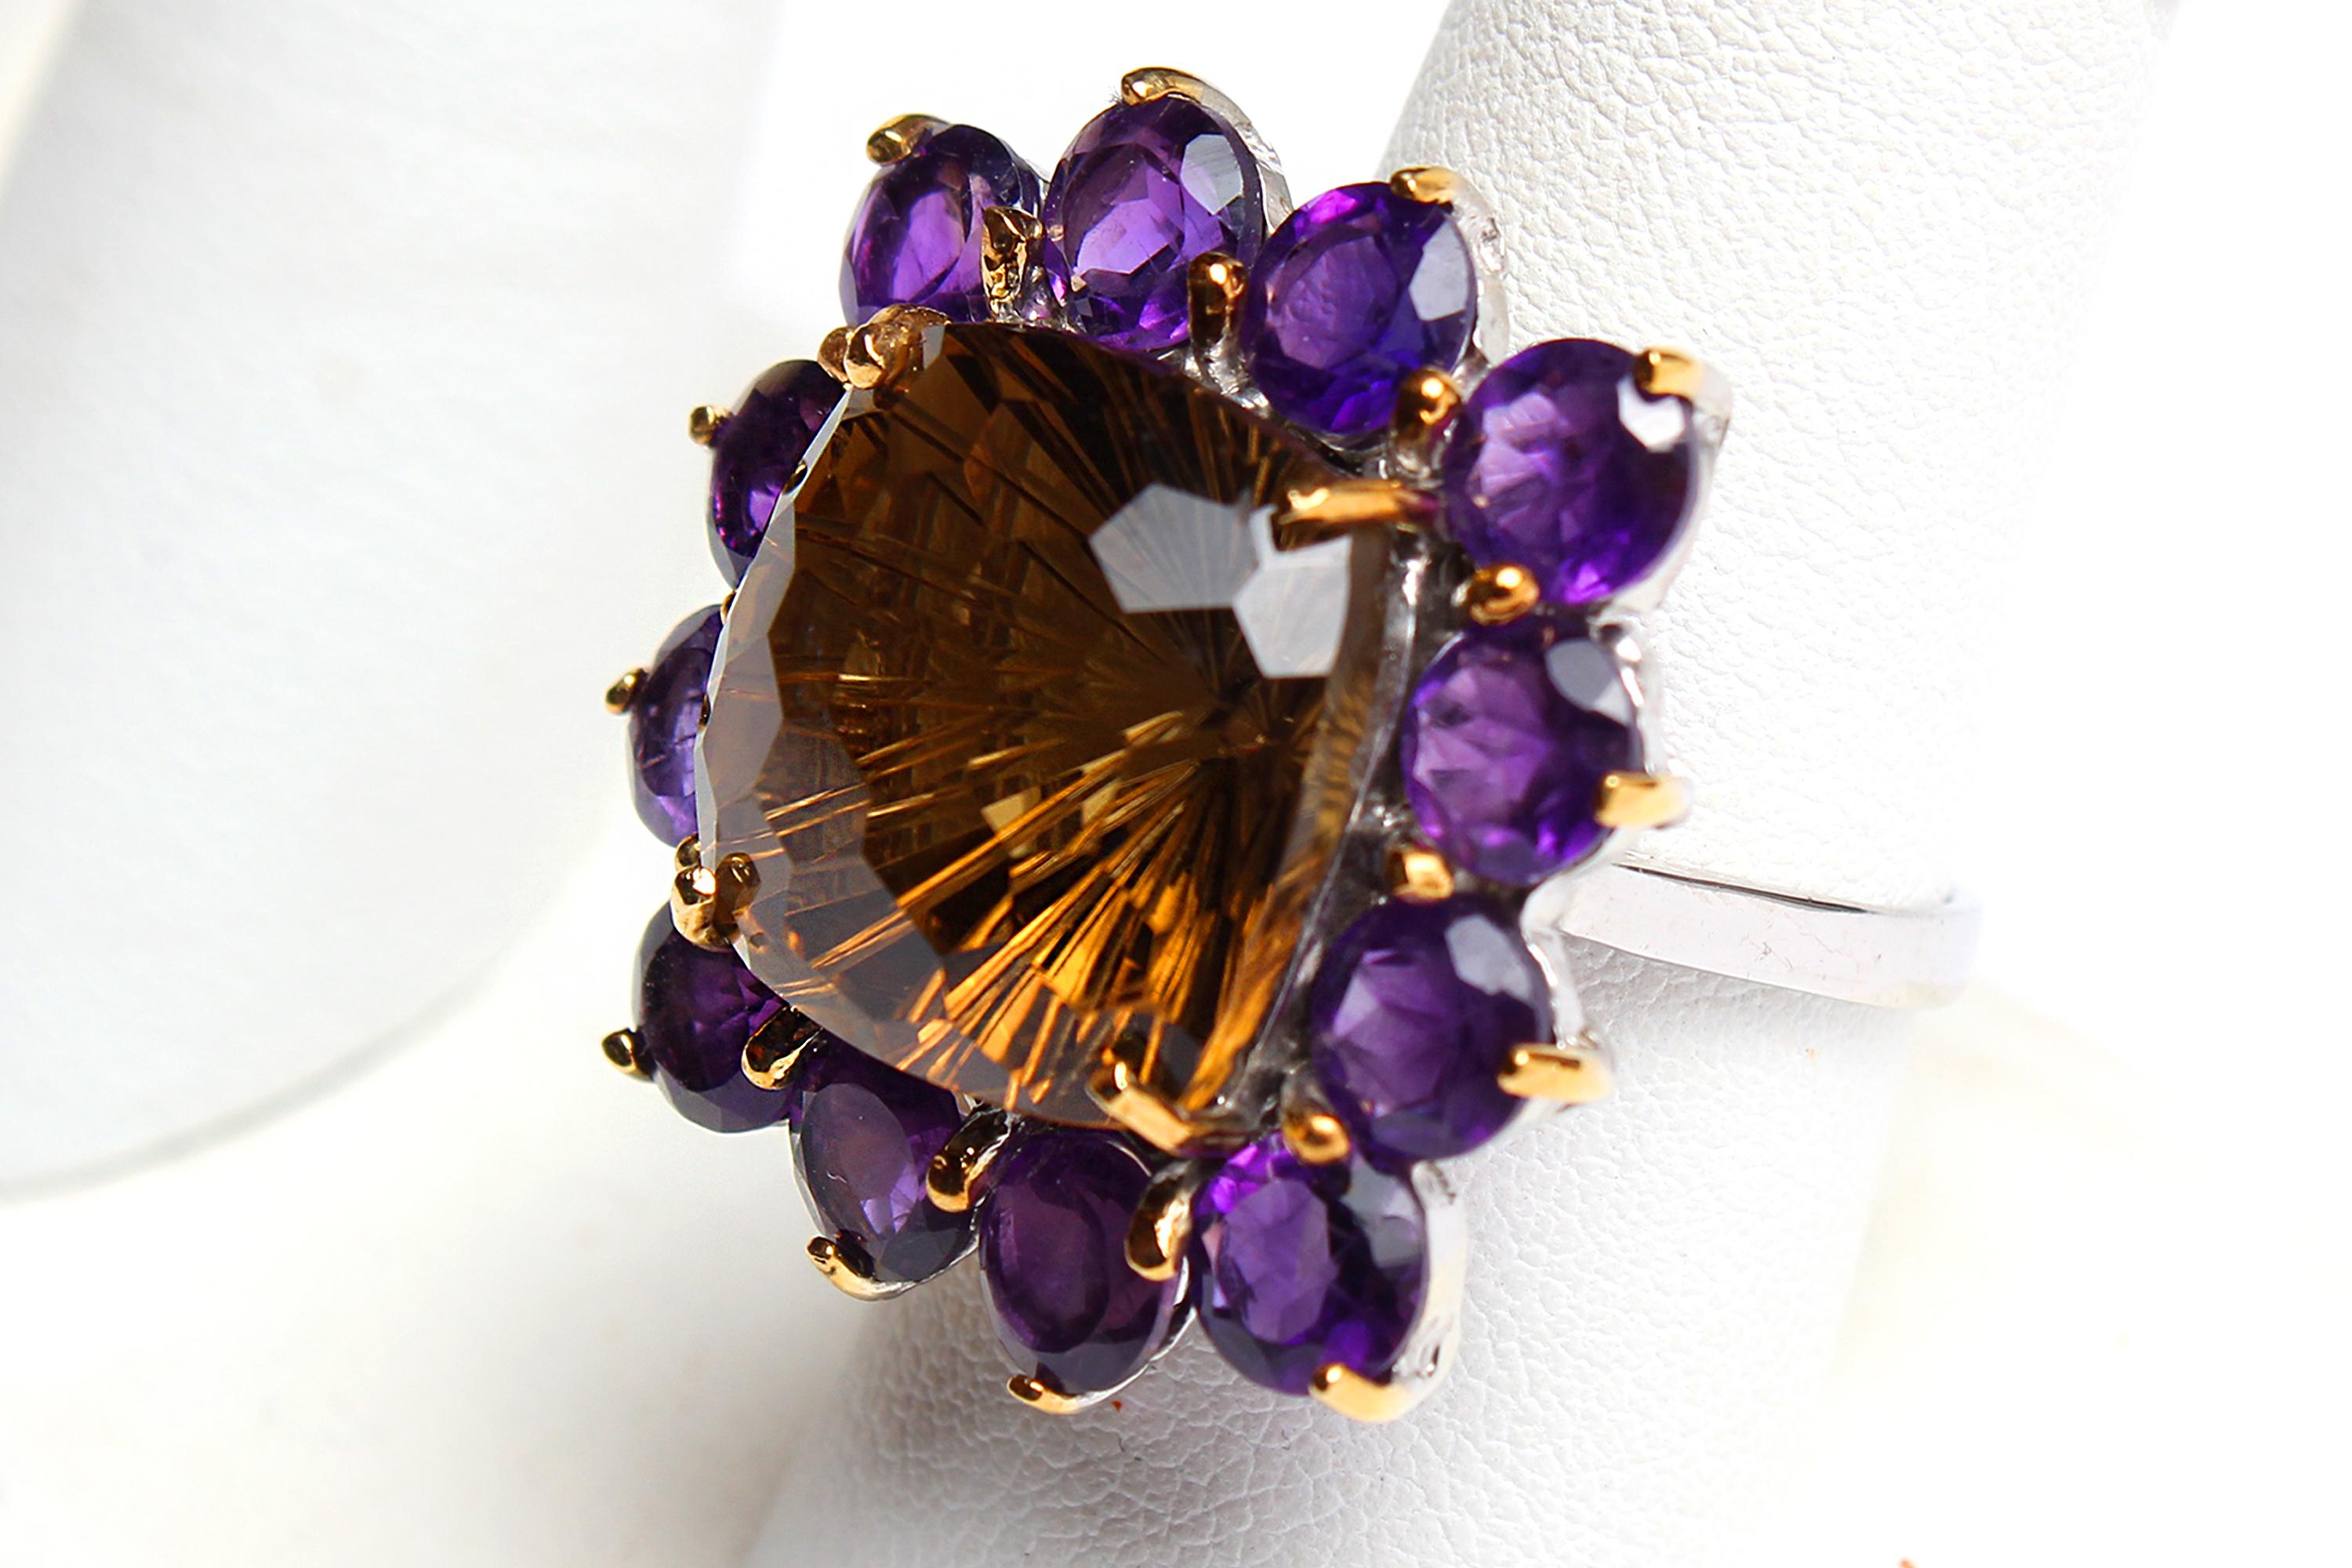 - 925 STERLING SILVER;PLATE-2-TONE WHITE & YELLOW 14K

RING size -9.5(RESIZABLE)
Stone - AMETHYST
CITRINE
OTHER GEMS-AMETHYST
TOTAL WEIGHT-11.58

GRAM (TOTAL WEIGHT OF SILVER + STONE):DIMENSION-
STONE 6.0 TO 16.0 MM.* RING SIZE 9.5* FACE RING 27.0